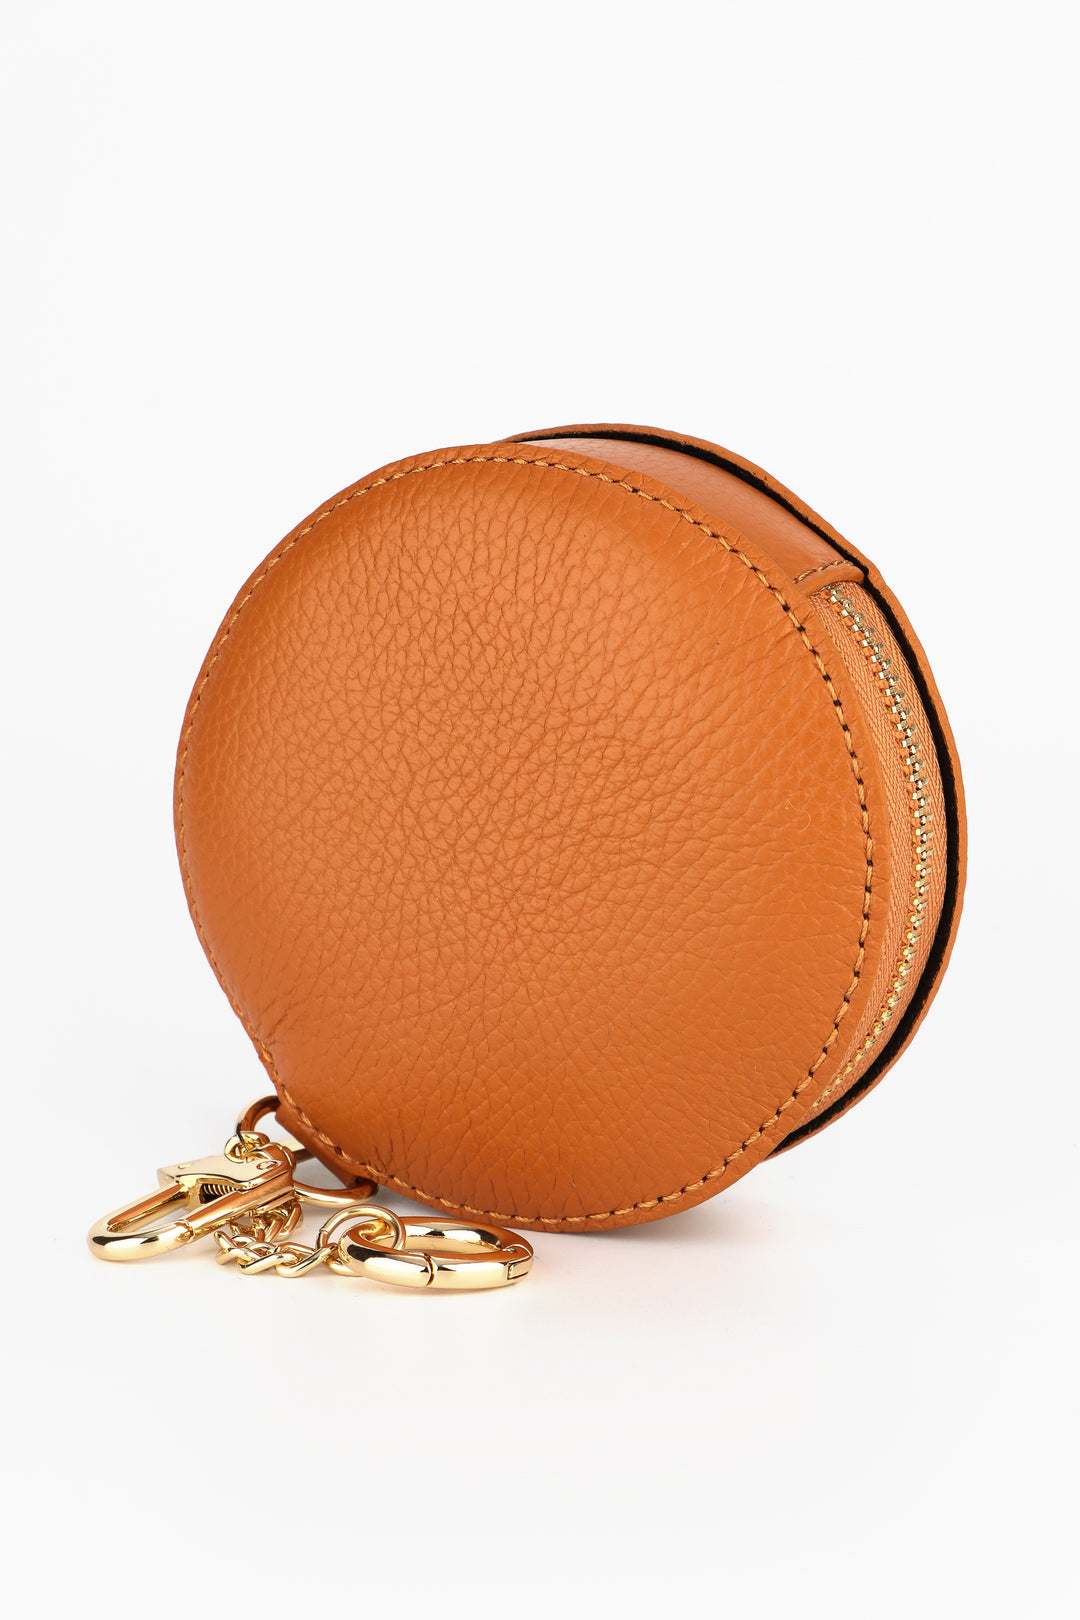 tan coloured round leather coin purse with a zip closure and two gold keyring attachments